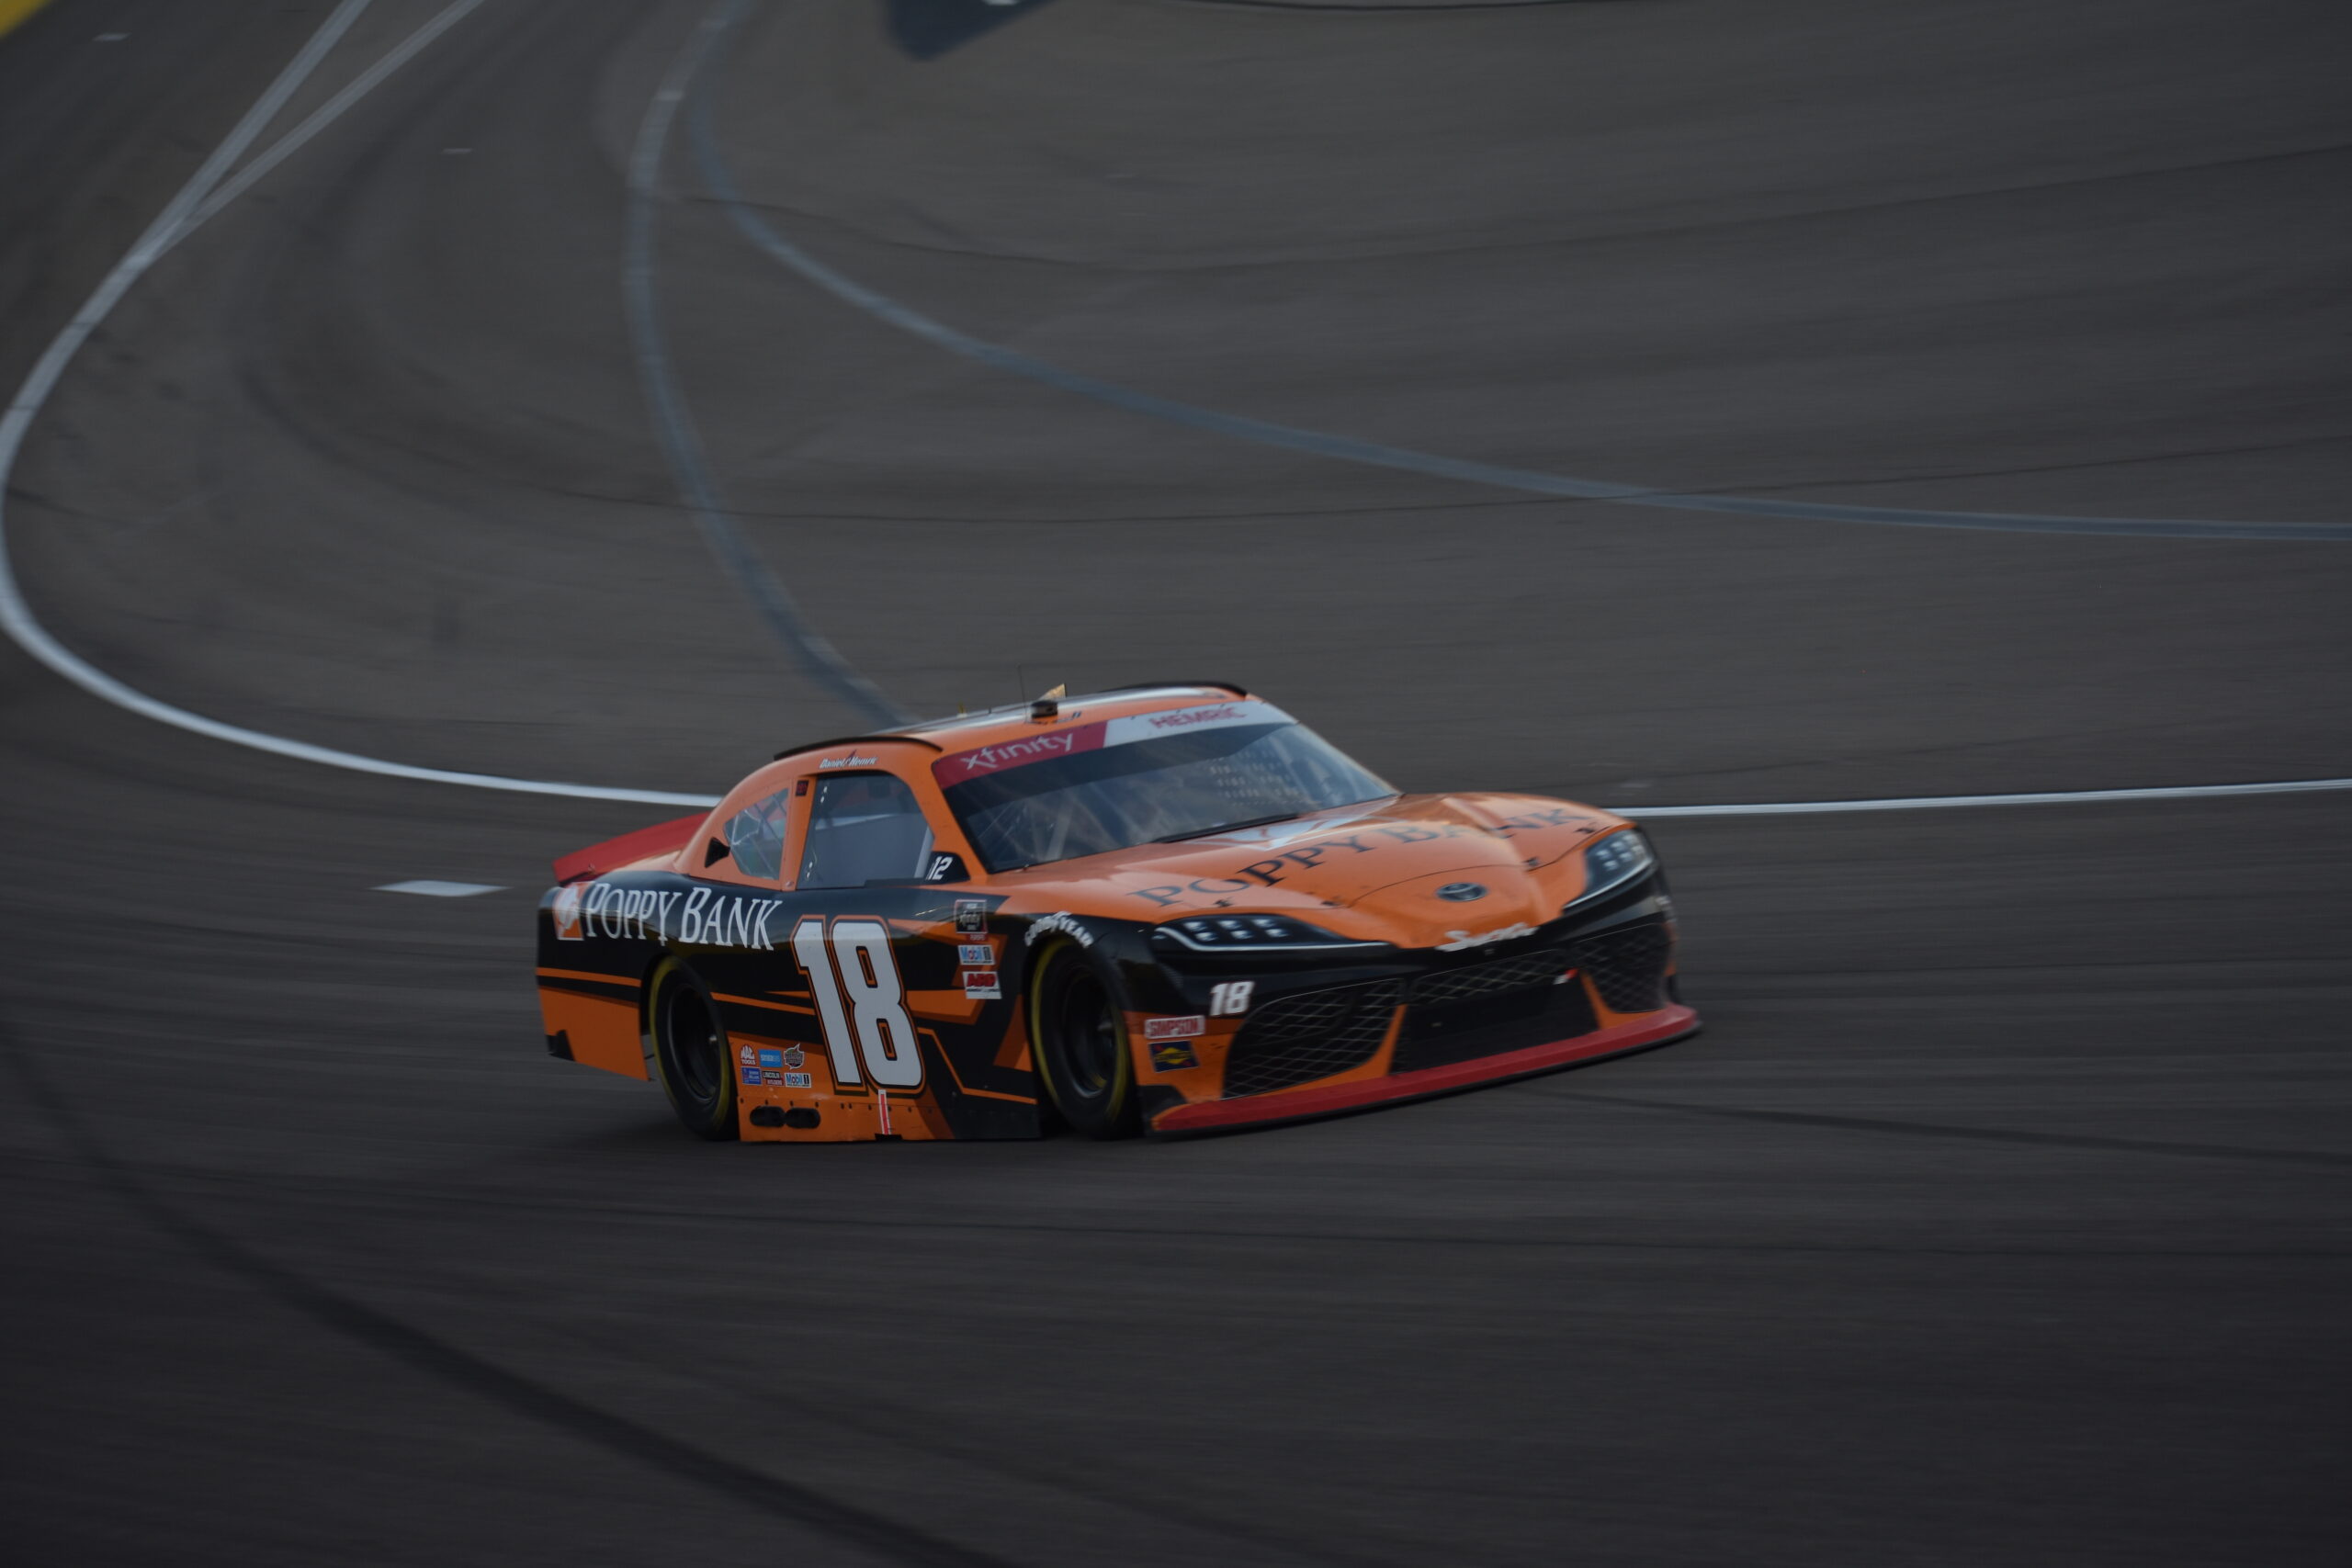 "I’ve never driven these vehicles. I’ve never driven these Toyota Supras at any of these racetracks." - Daniel Hemric (Photo: Landen Ciardullo | The Podium Finish)